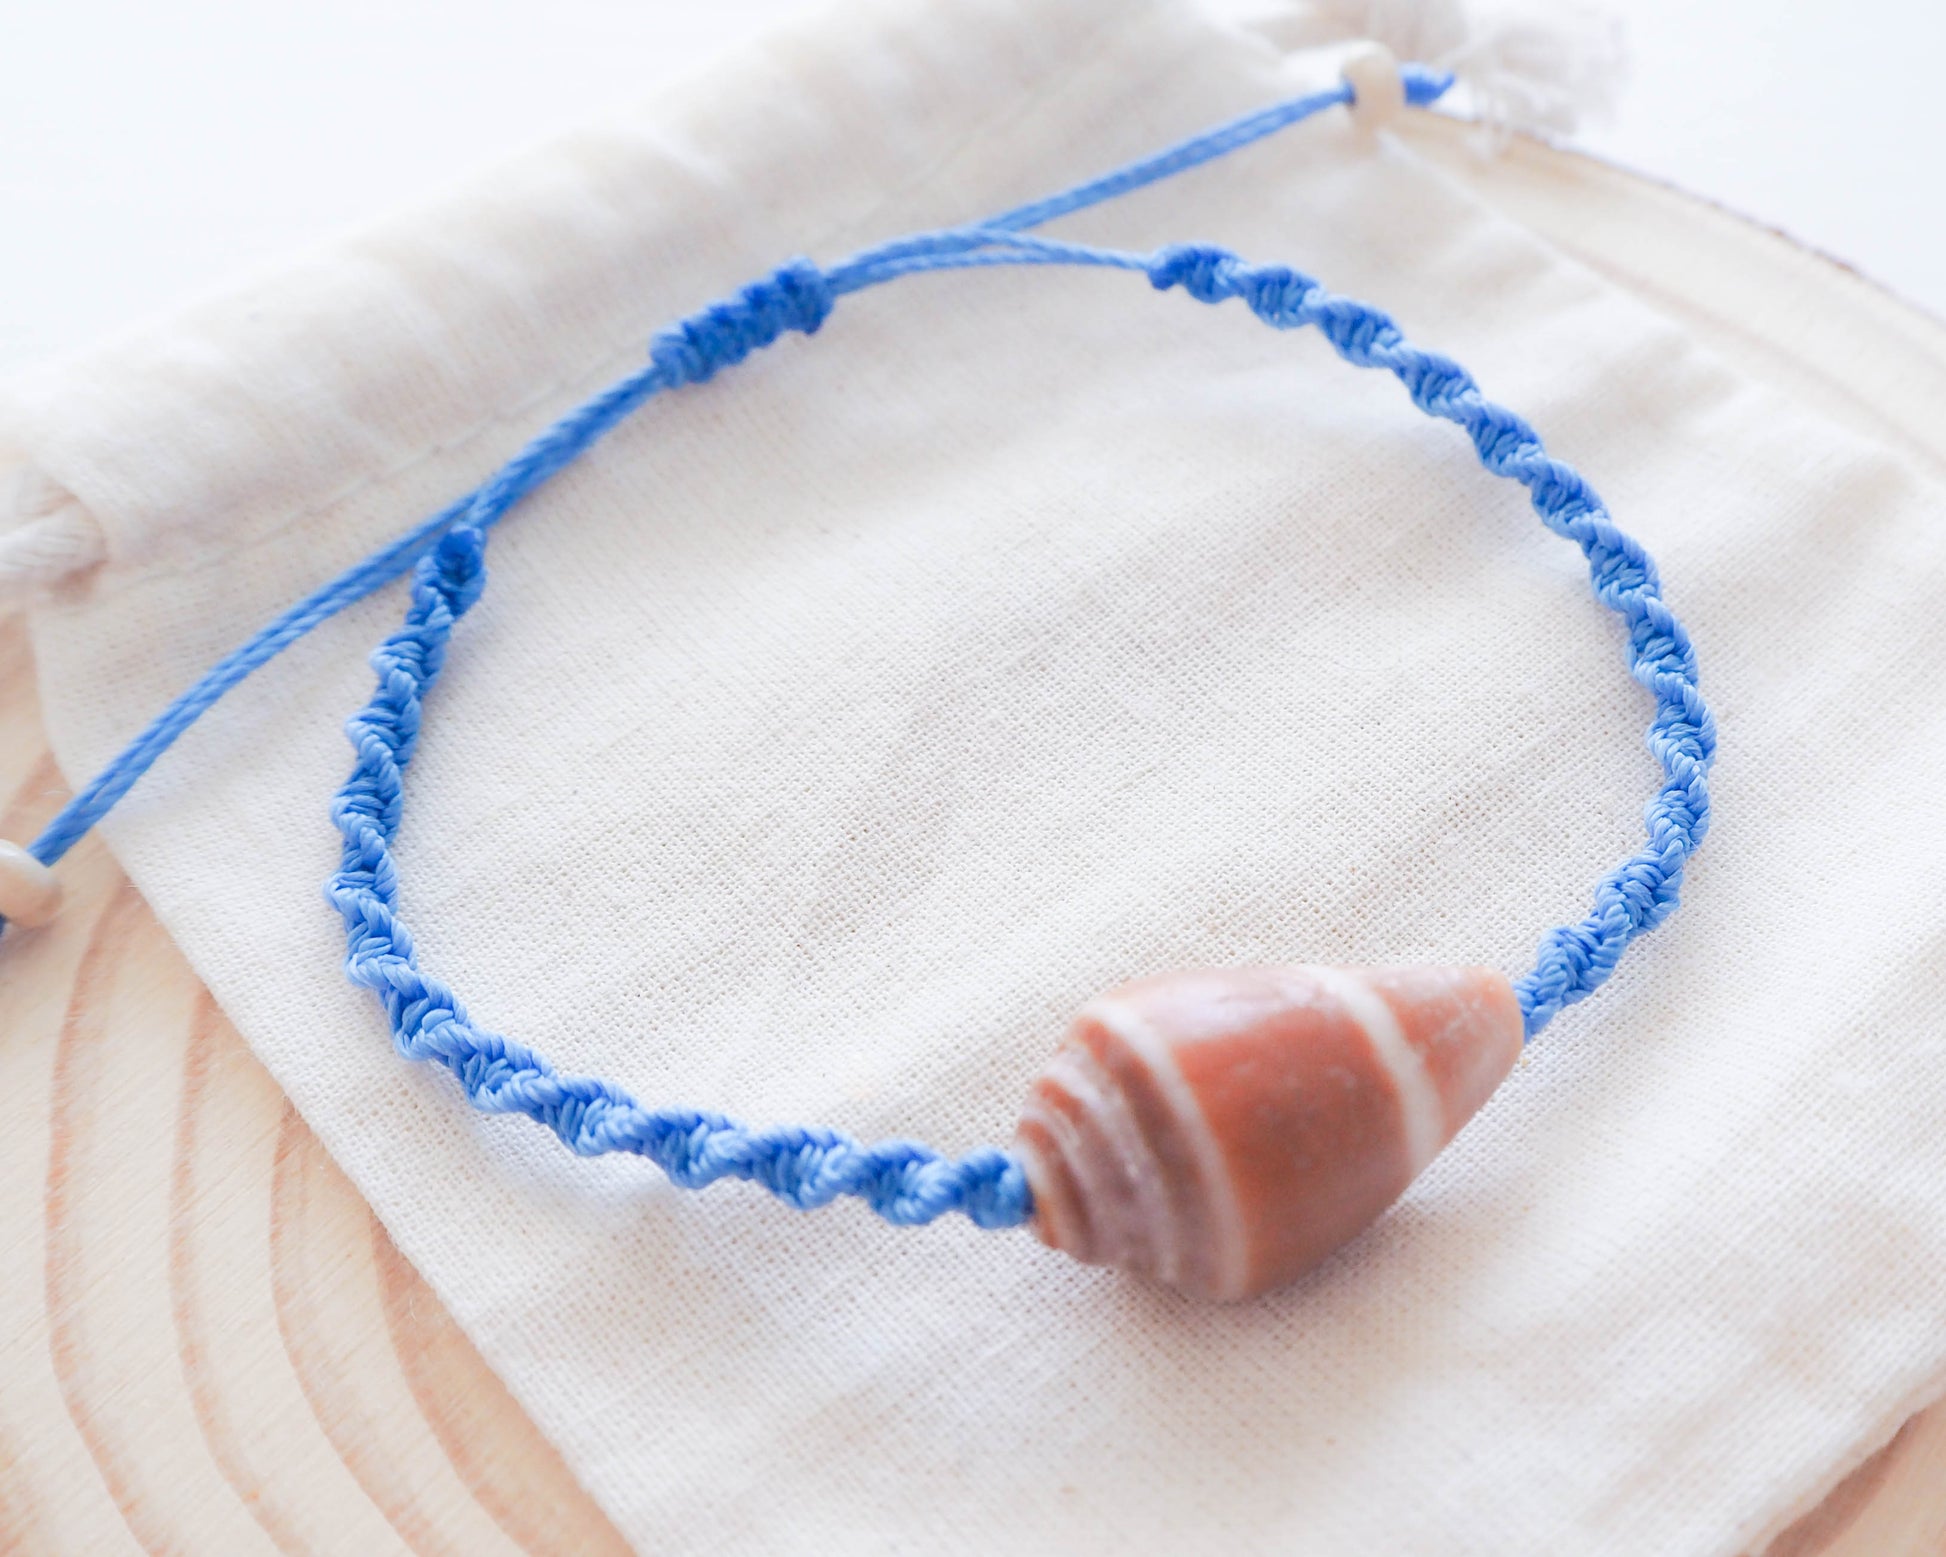 Handcrafted Jewelry, Portuguese Coastal Charm, Beachcomber's Adornment, Coastal Beauty: Cone Shell on Braided Cord